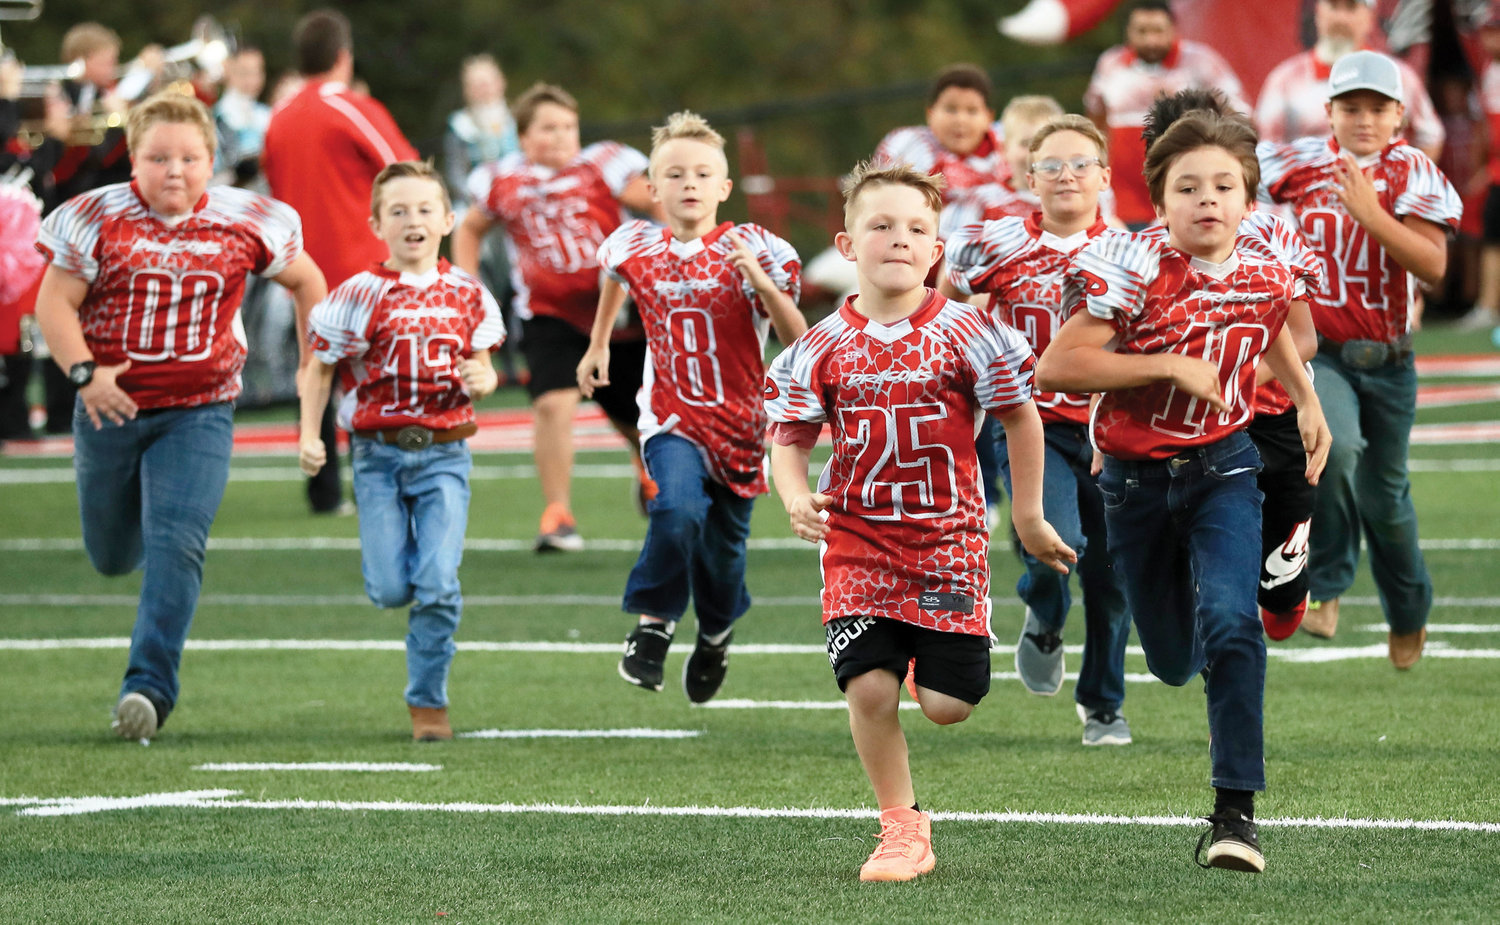 Xander Gavia (00), Collin Ellenberg (13), Jerimiah Berger (8), Cash Huff (25), Isaiah Hines, Drake Rogers (10) and Jackson Hines (34) run on the field for Purcell’s Pink Out game against Crooked Oak last Thursday night.